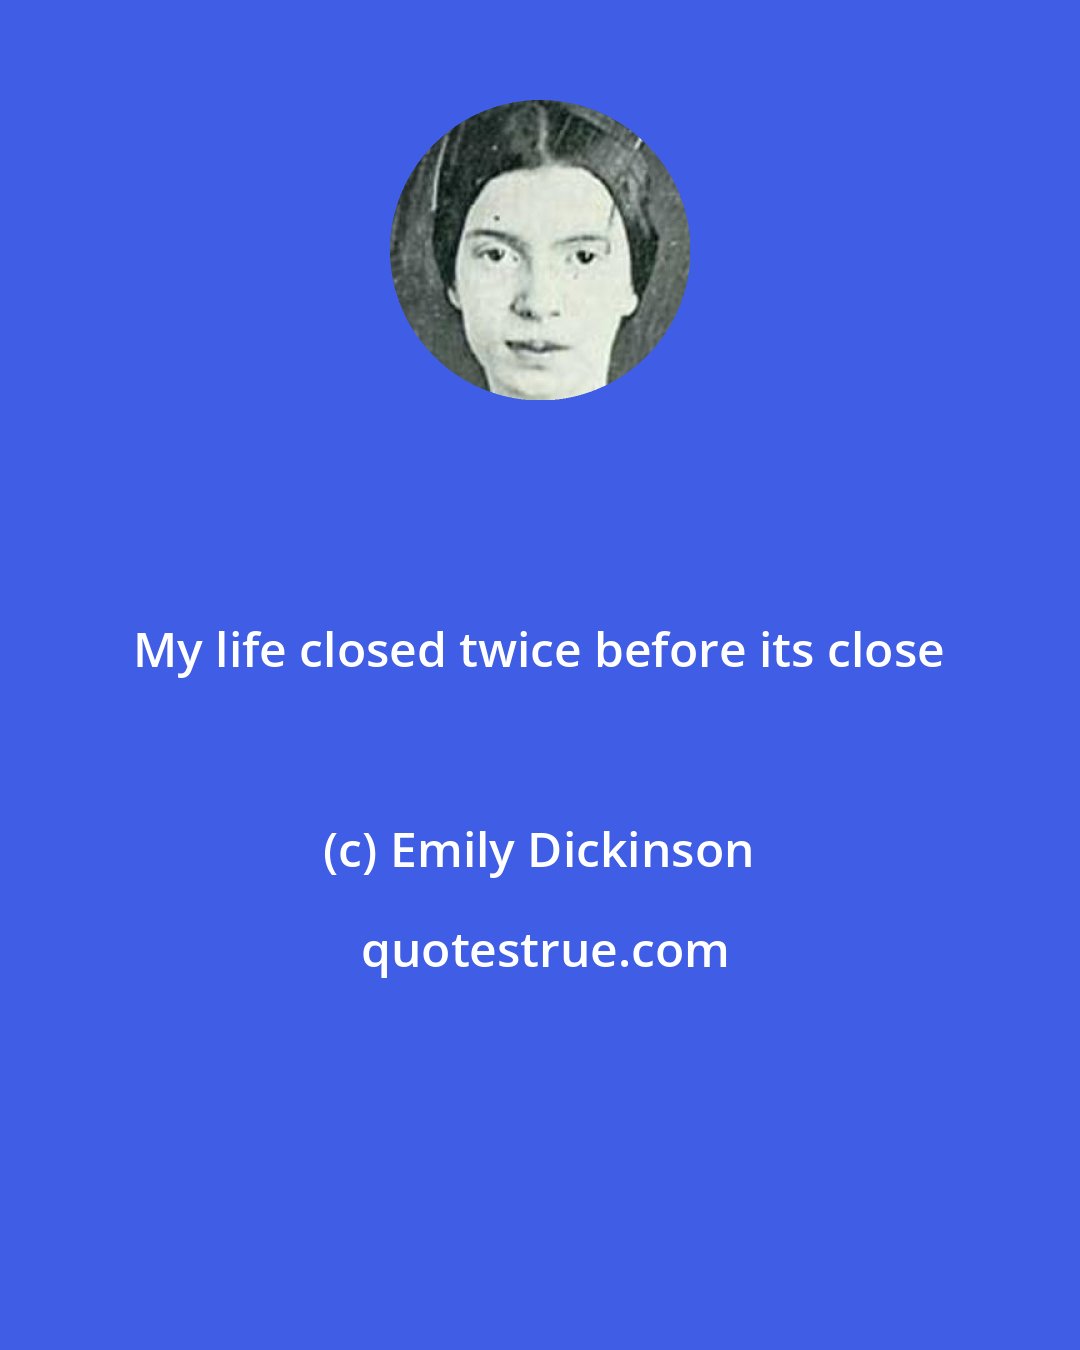 Emily Dickinson: My life closed twice before its close